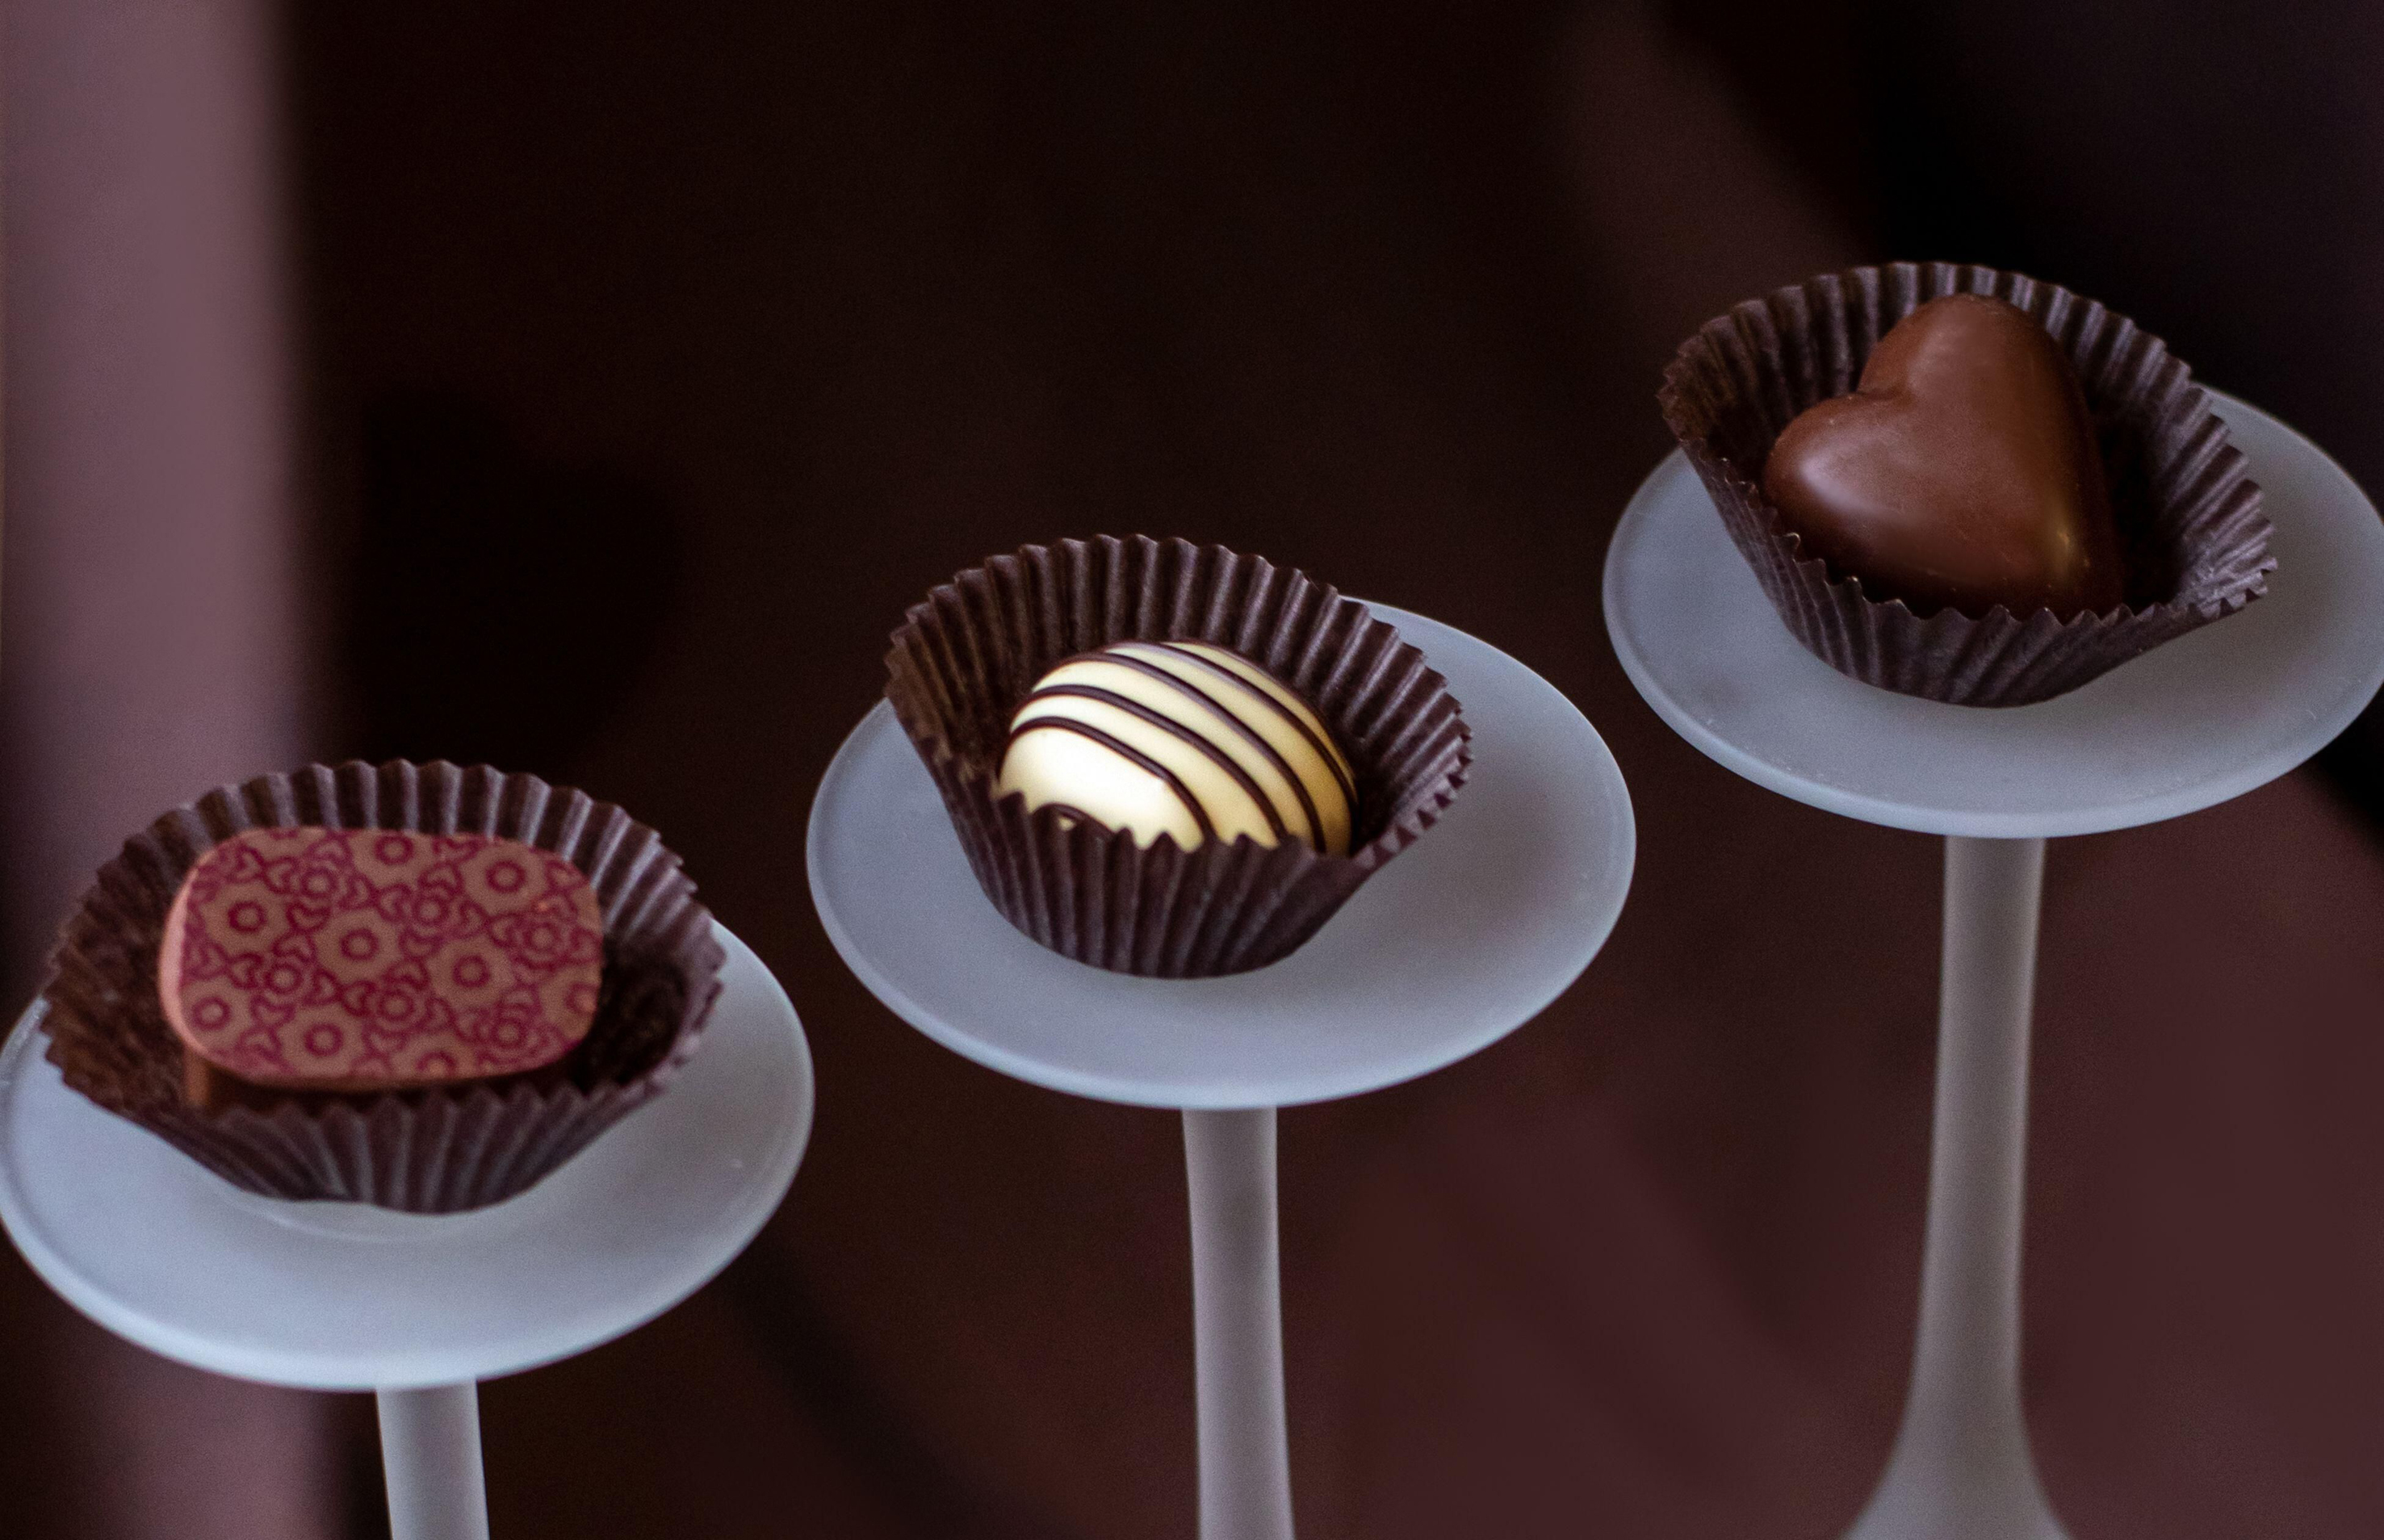 A variety of fancy chocolates on glass pedestals